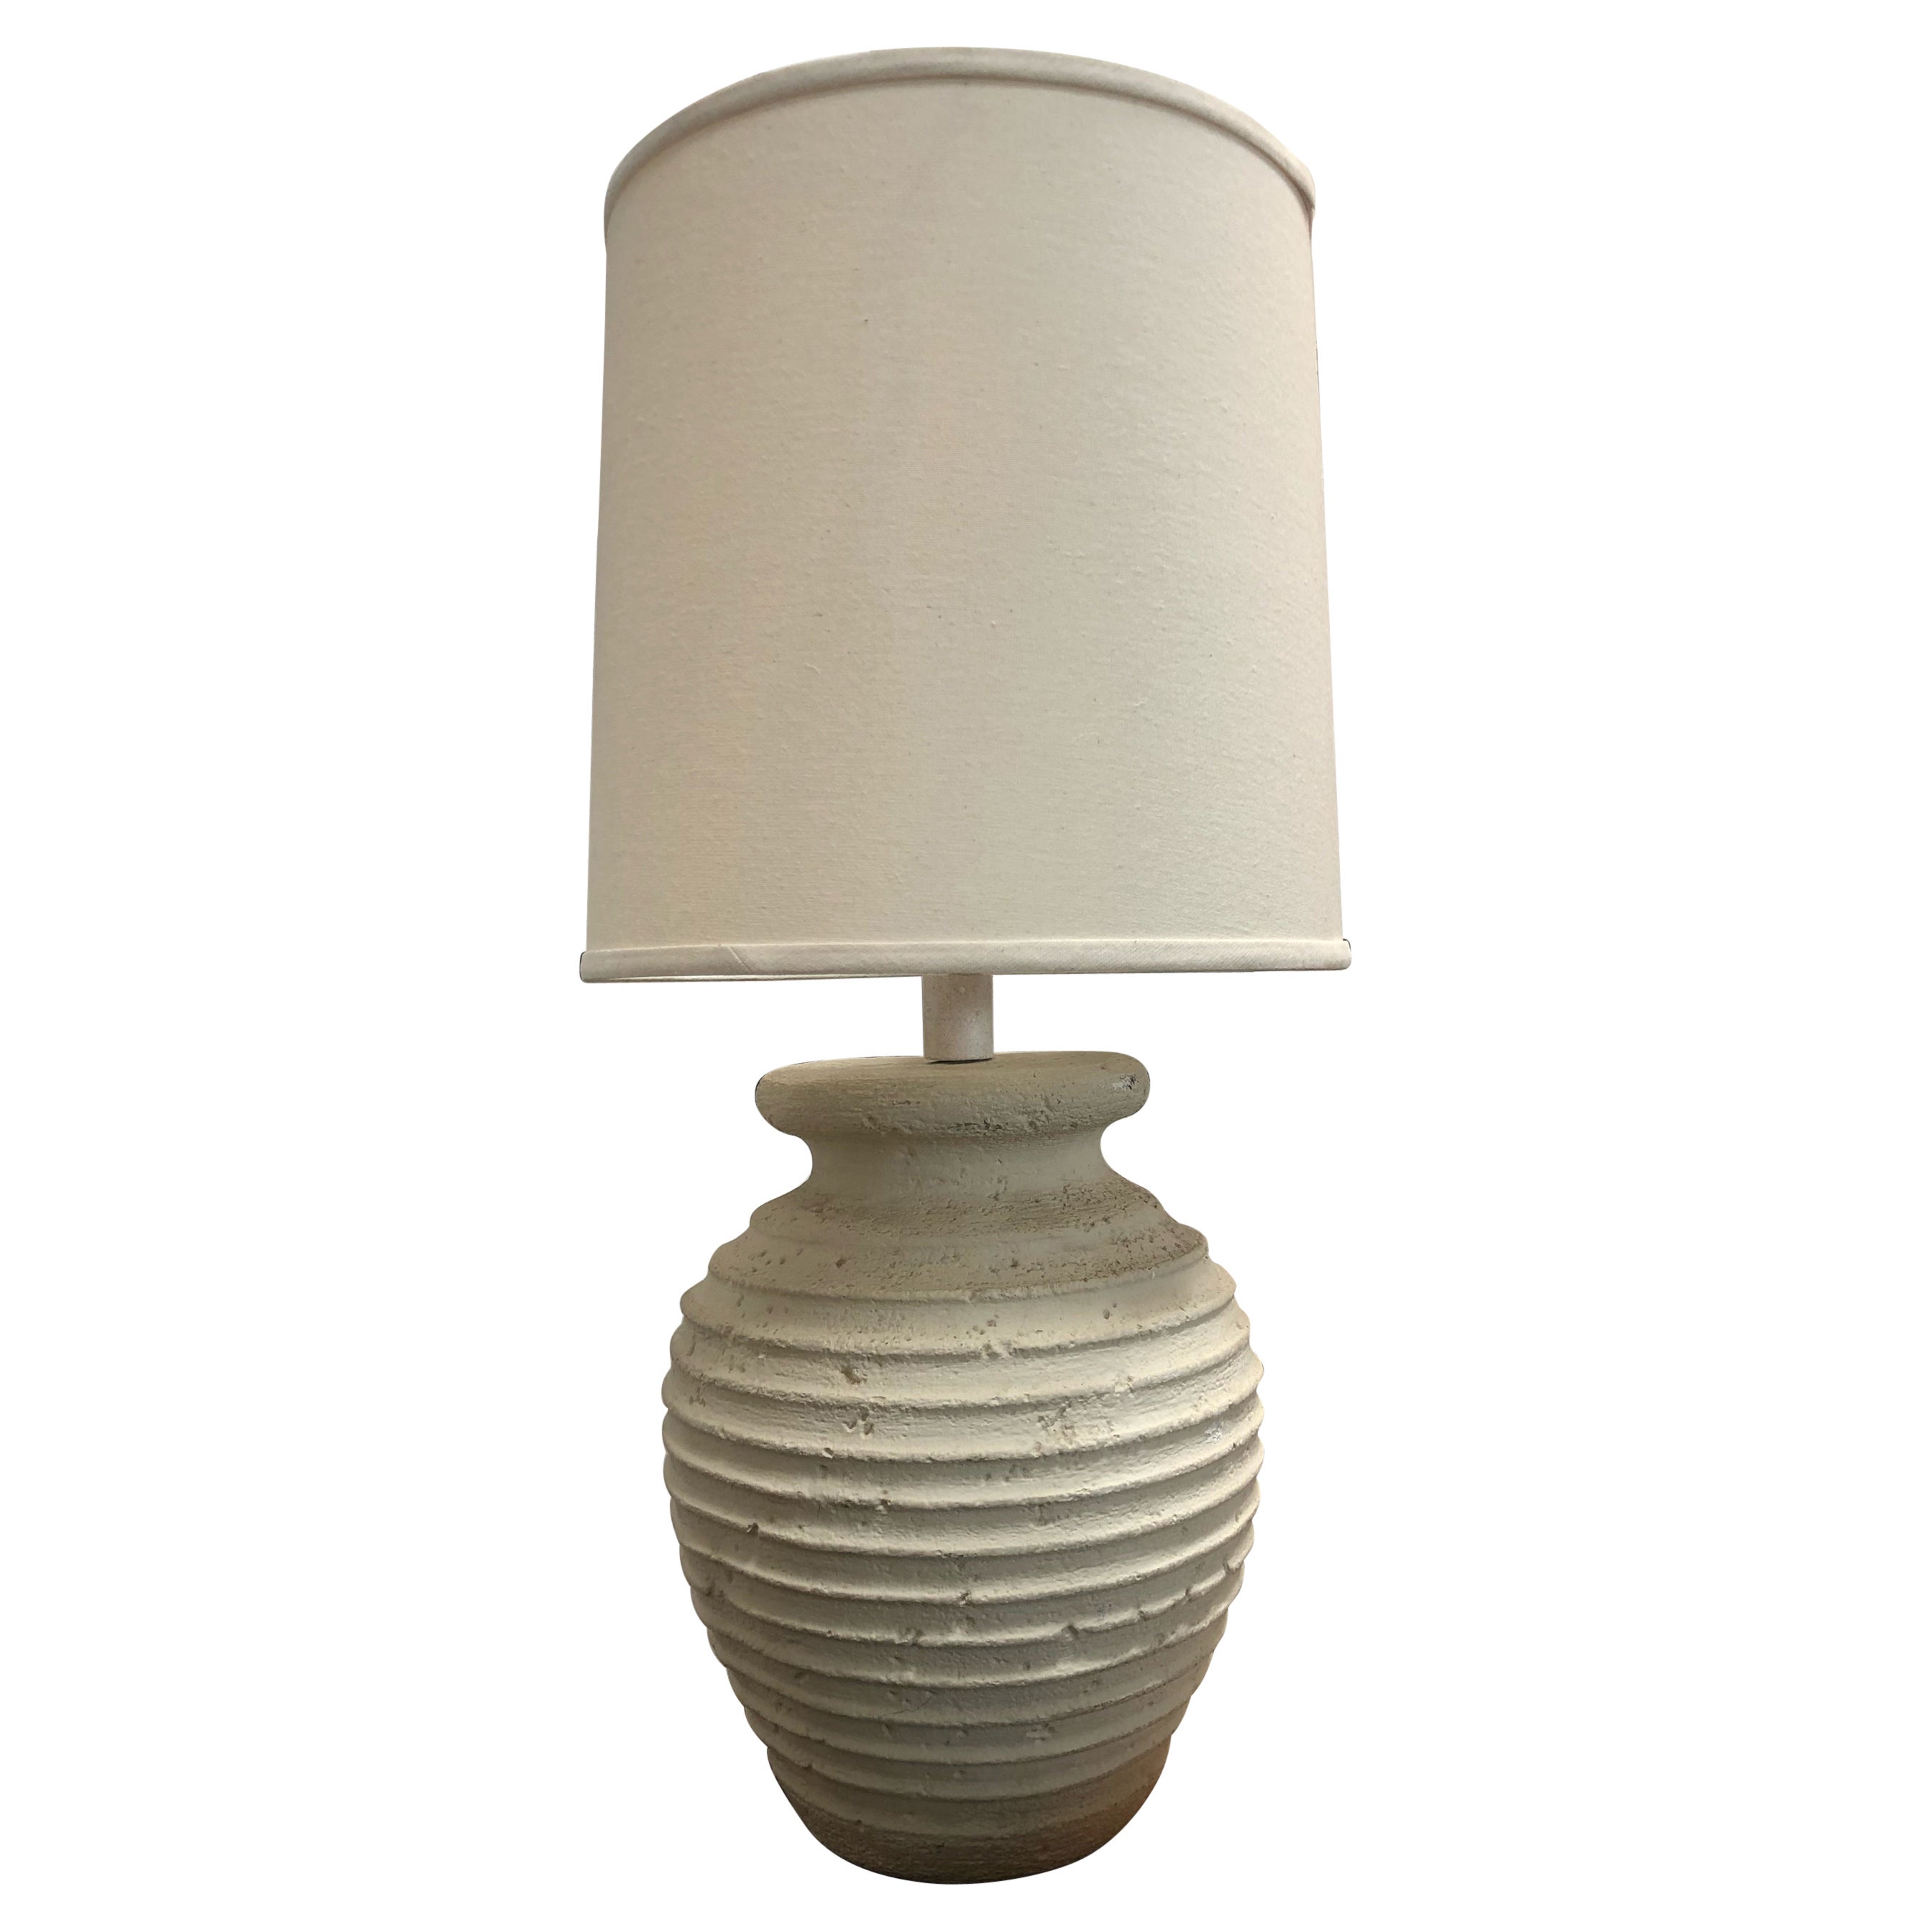 Vintage White Table Lamp For At, Rustic Antique White Table Lamp